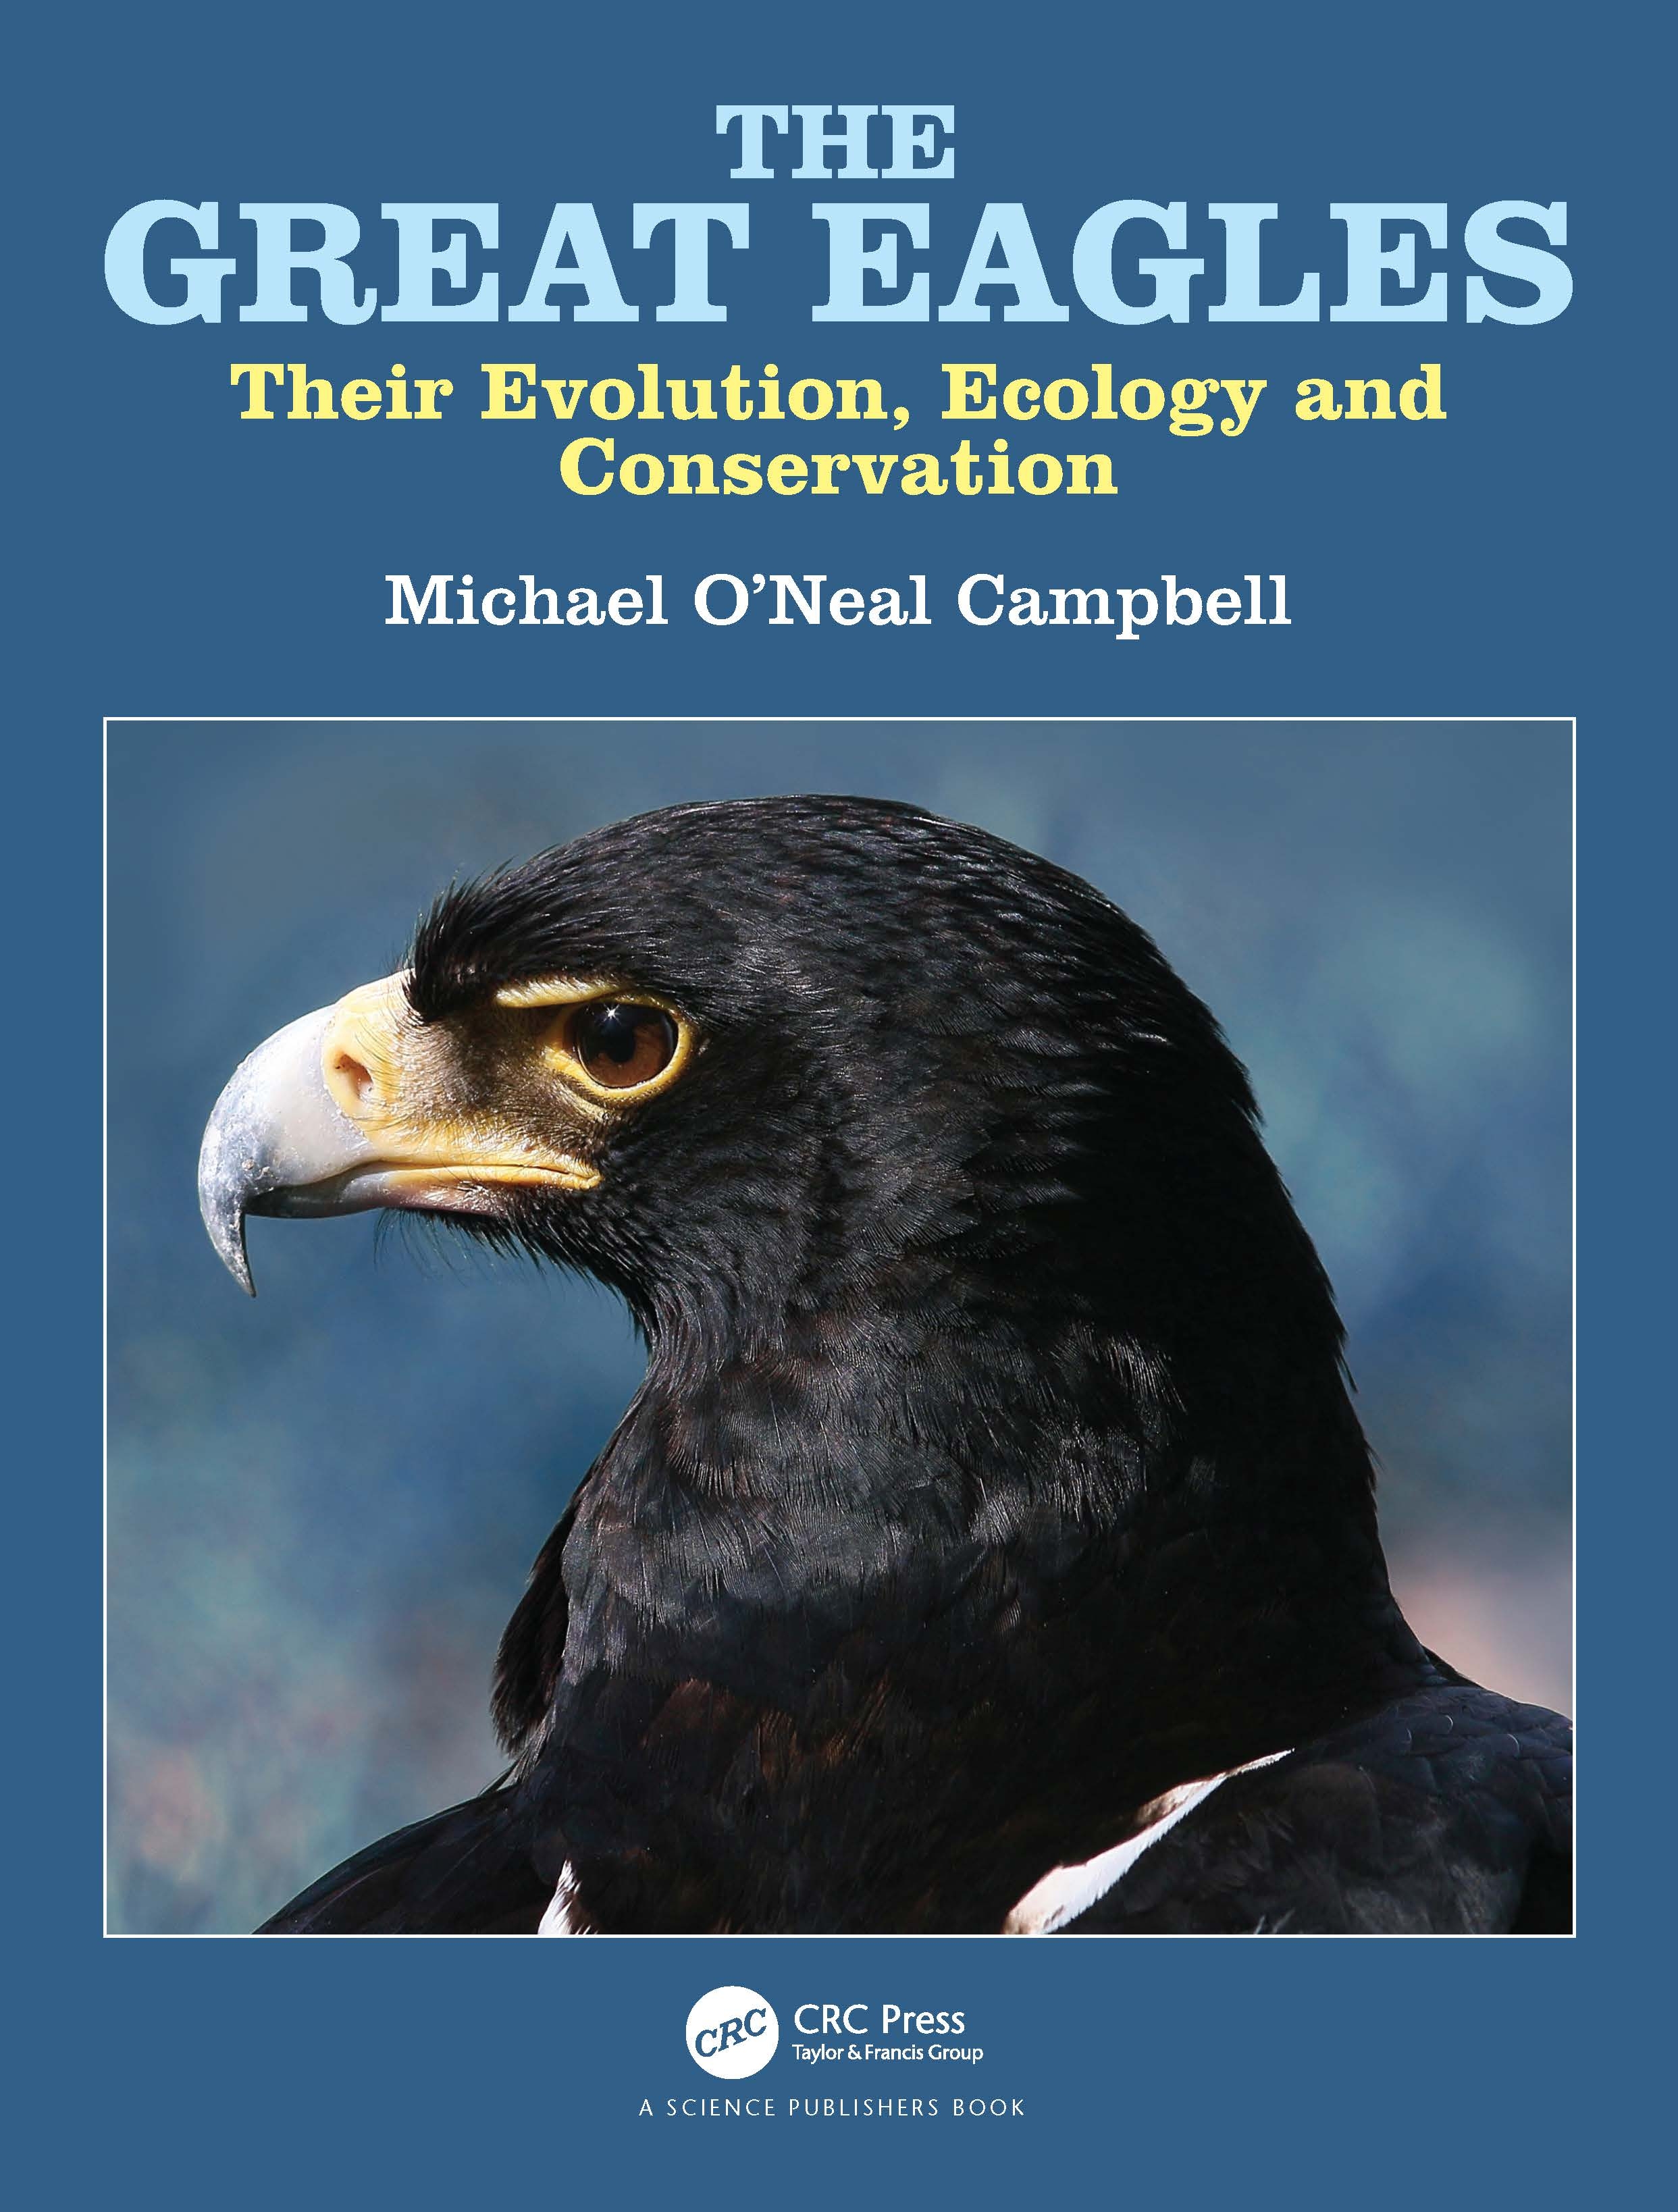 The Great Eagles: Evolution, Ecology and Conservation